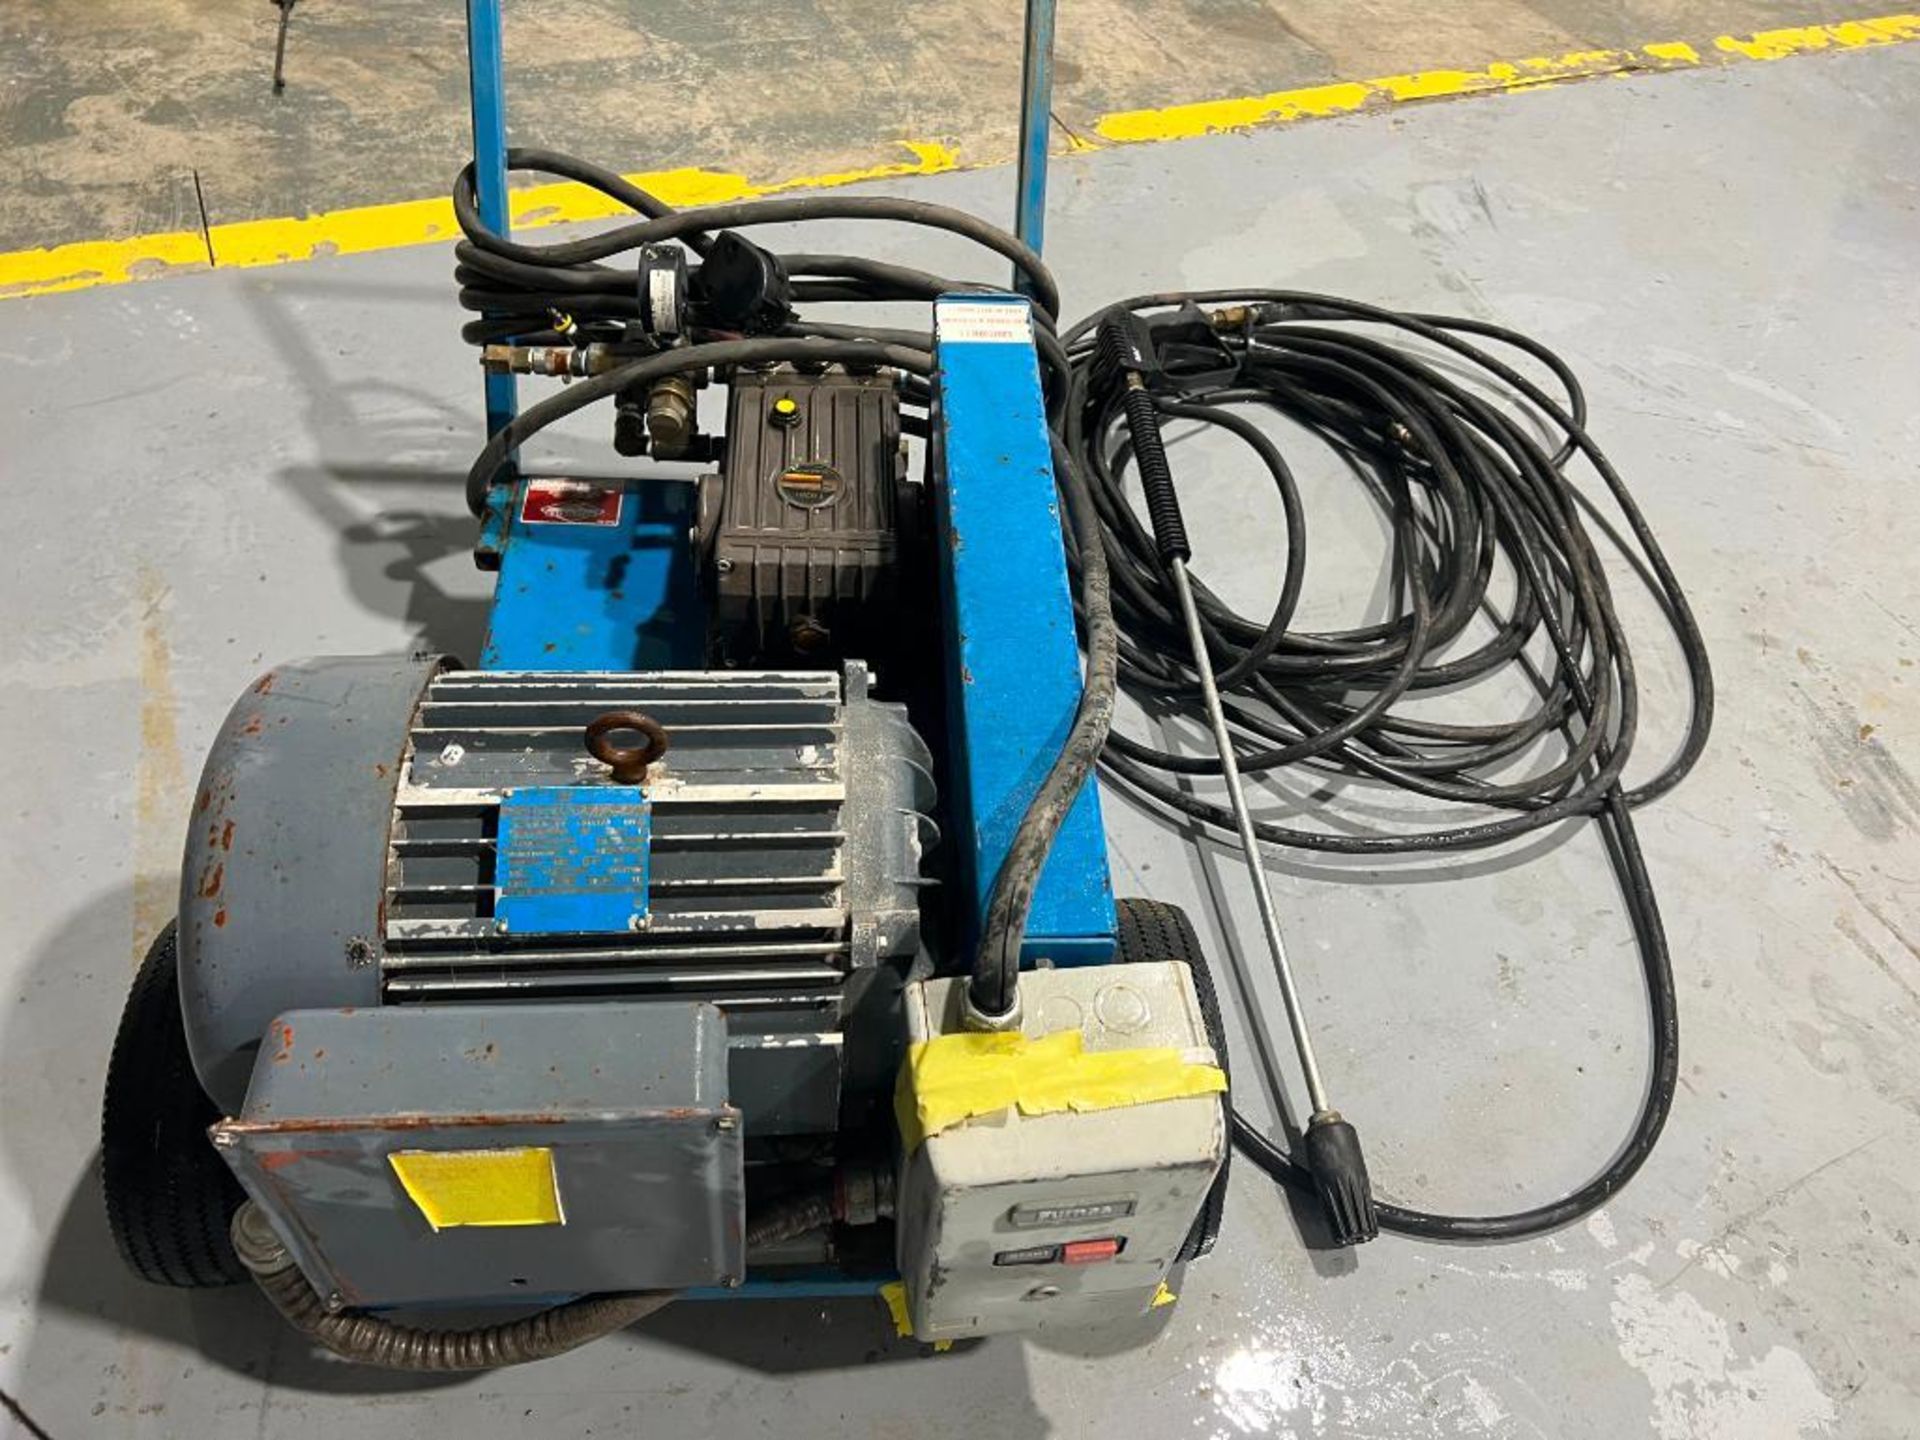 Dultmeier Sales Pressure Washer Farm 25, Model #DU PMT9281B, Serial #31 with Wand and Hose. Located - Image 11 of 16